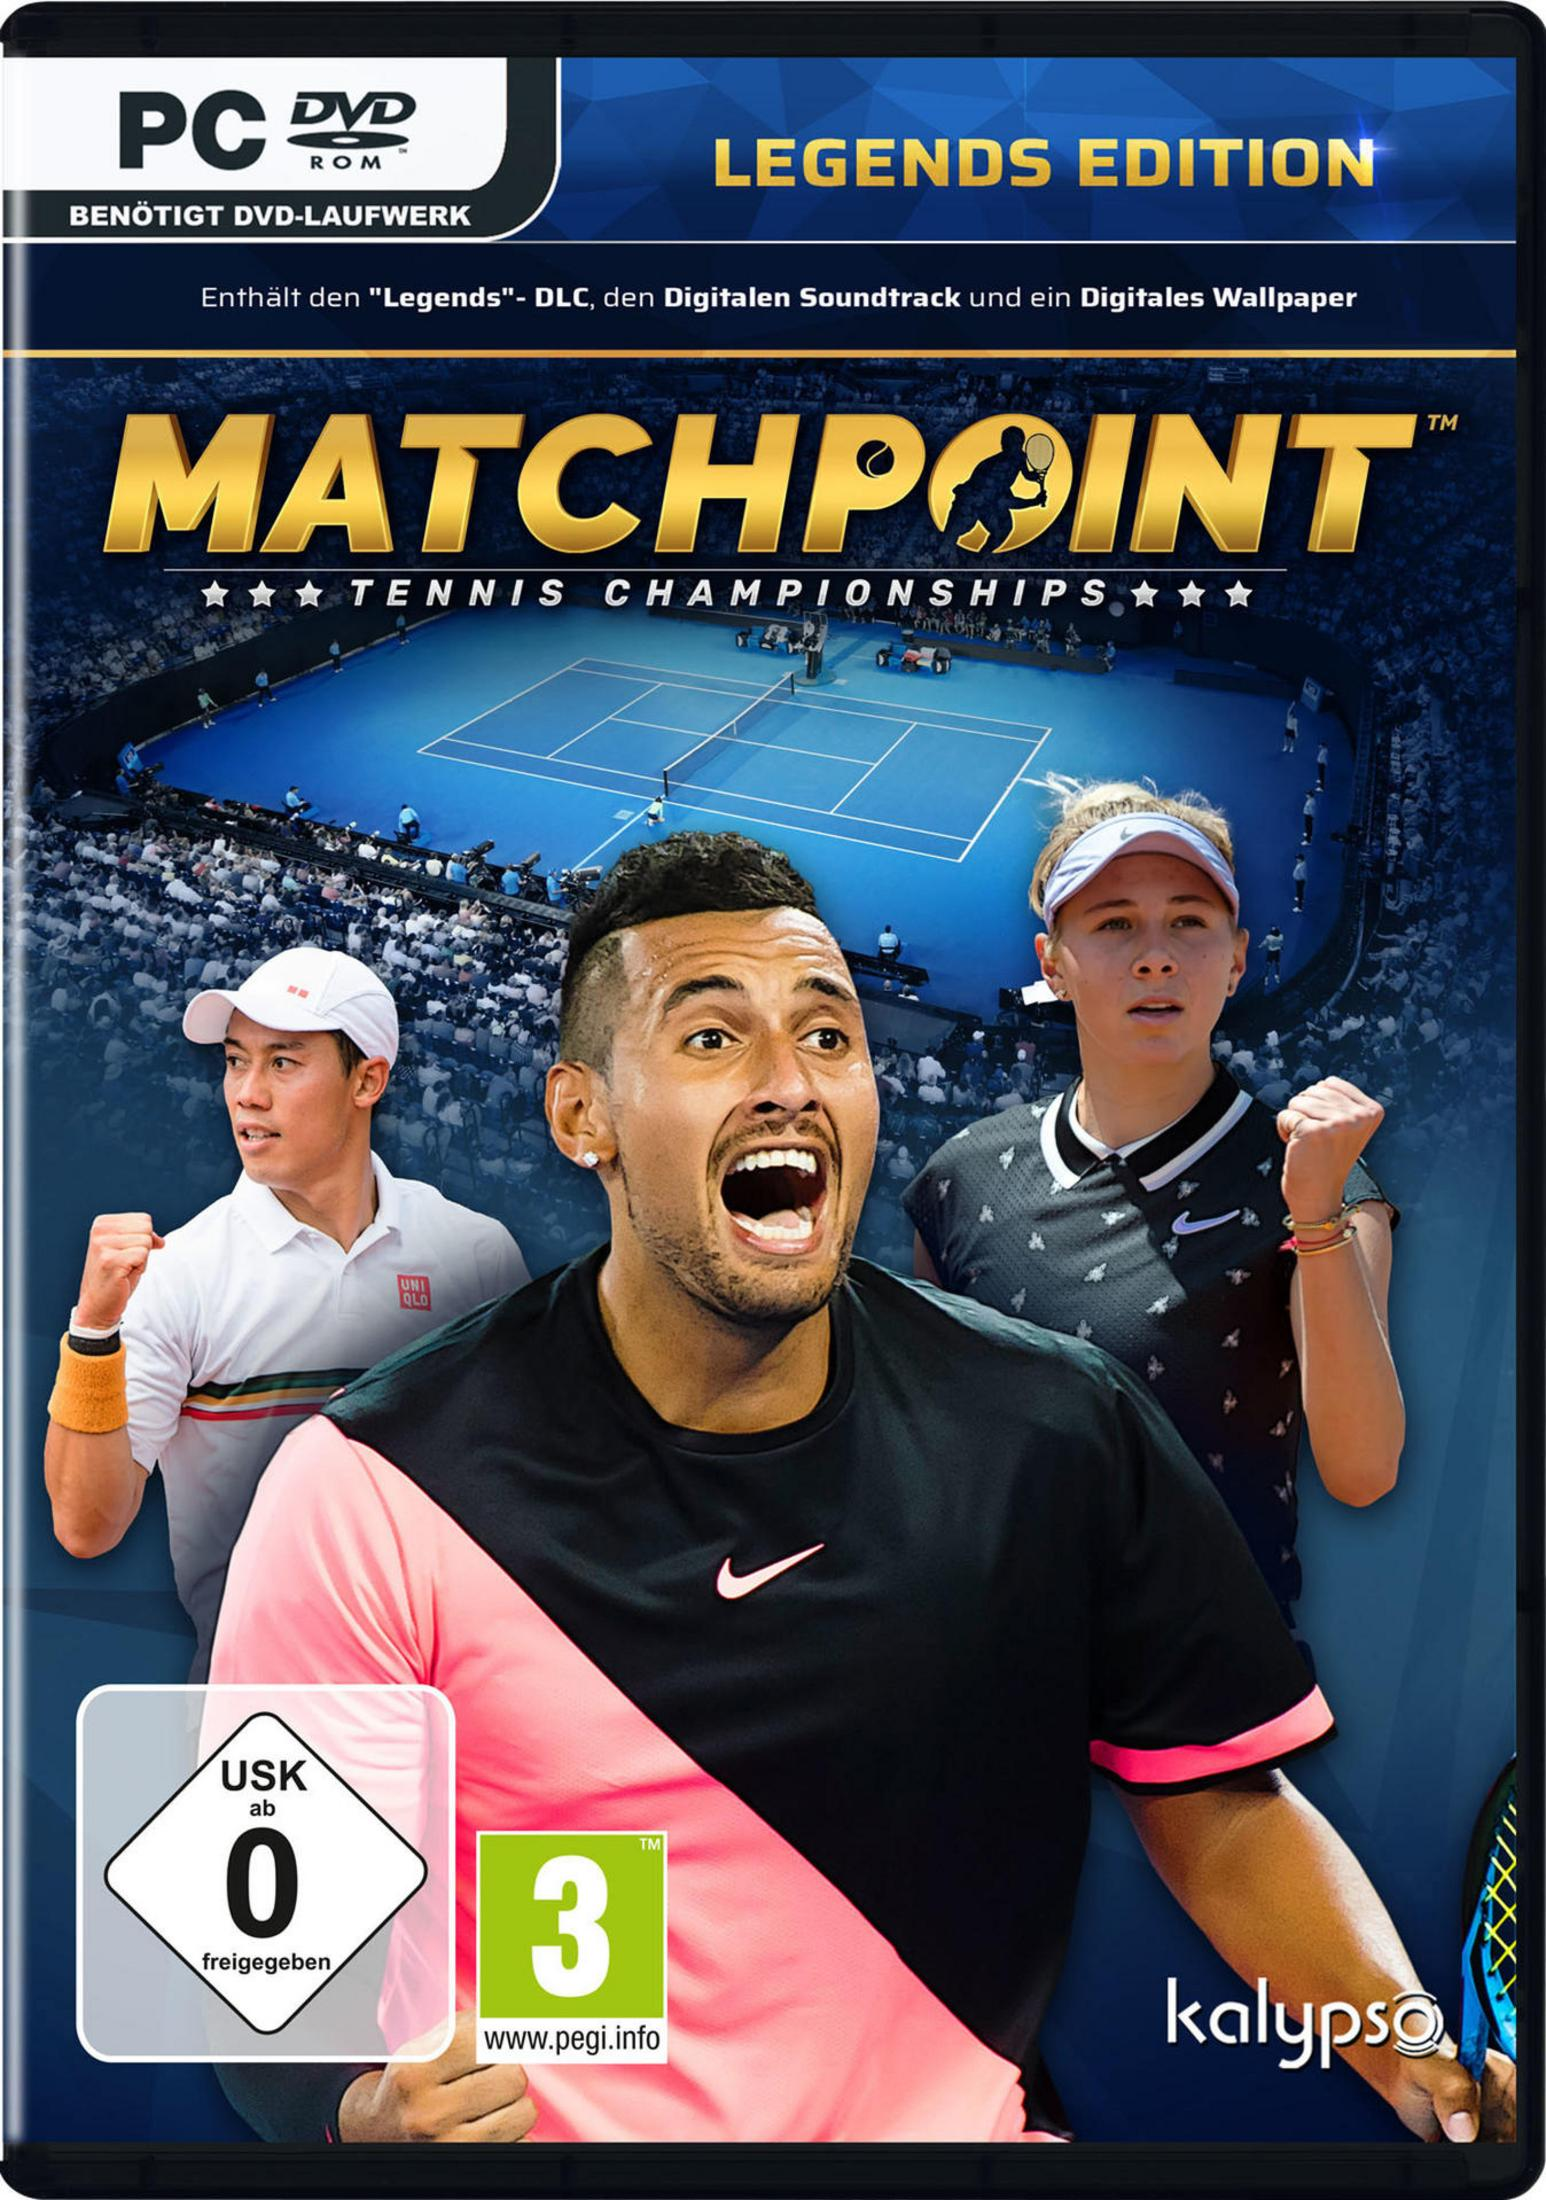 LEGENDS TENNIS EDITION - - CHAMPIONSHIPS MATCHPOINT [PC]